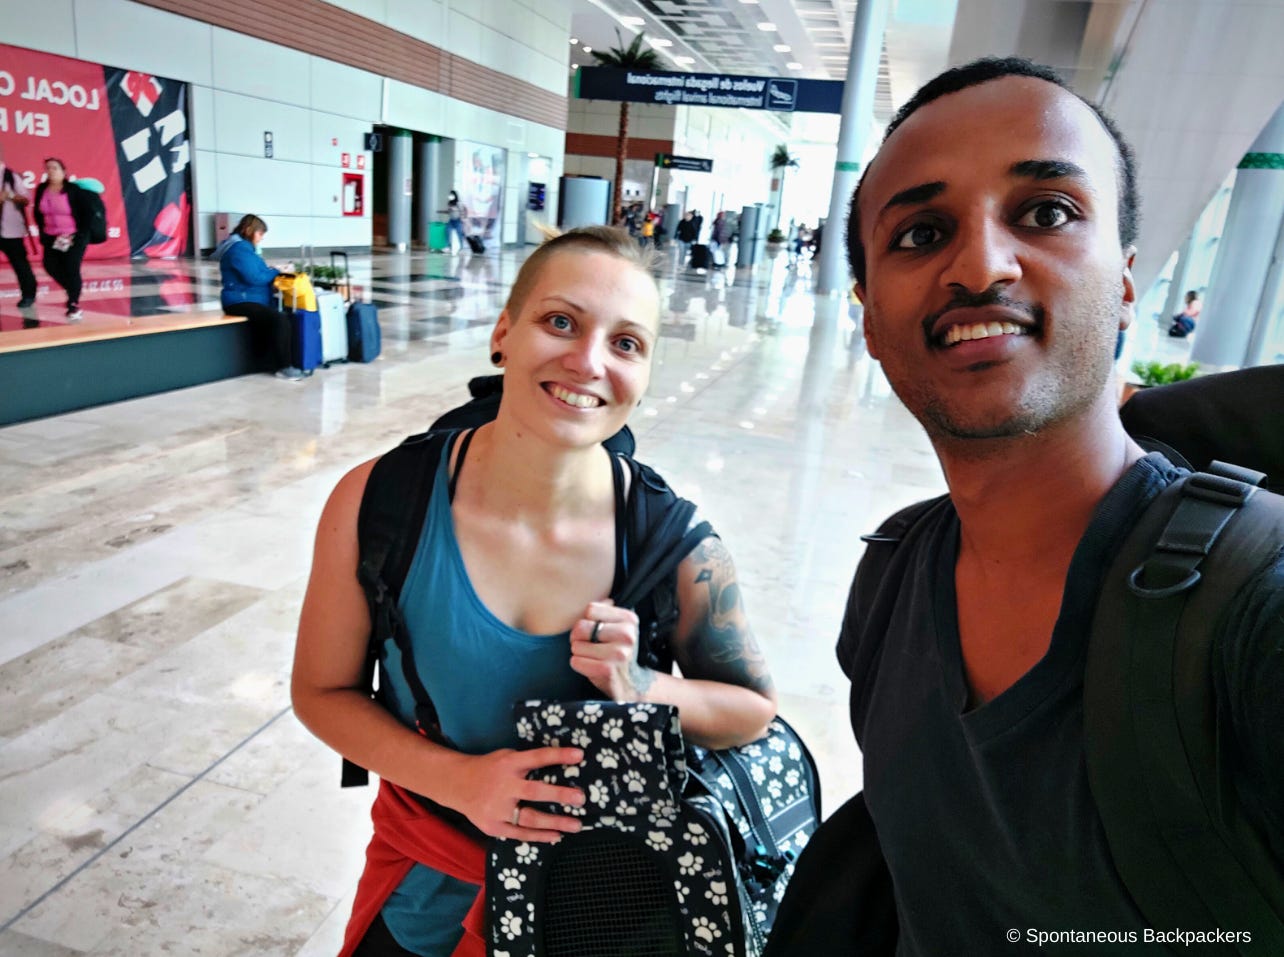 Spontaneous Backpackers at the Airport taking a selfie before flight